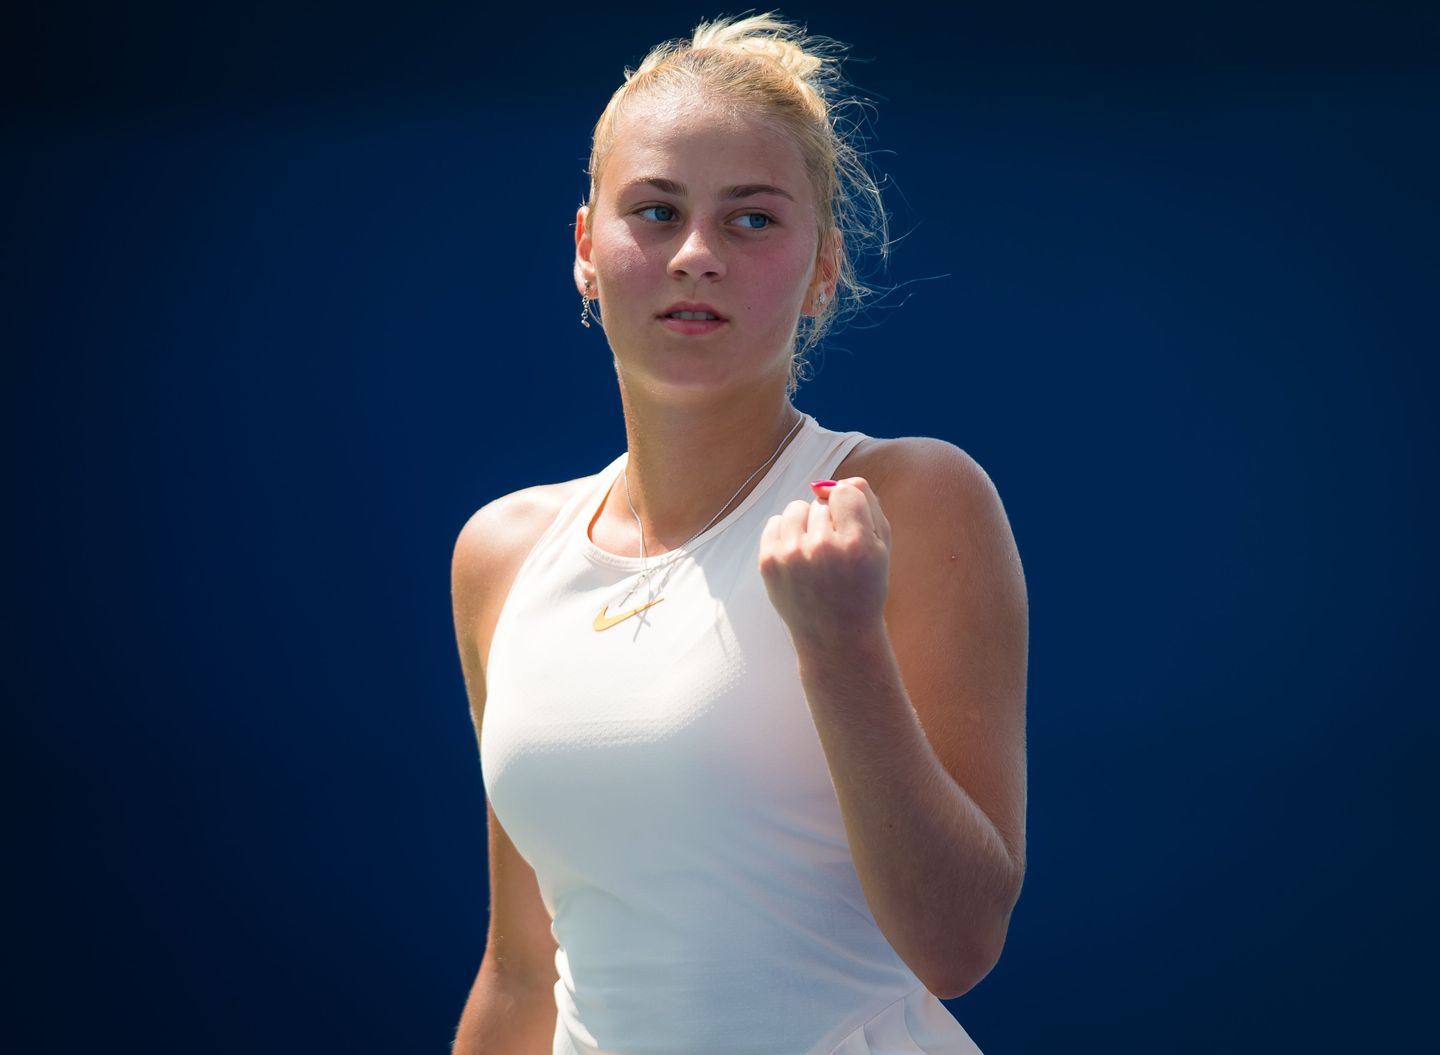 Kostyuk Defeated Her Opponent at the Start of the WTA Tournament in Chicago